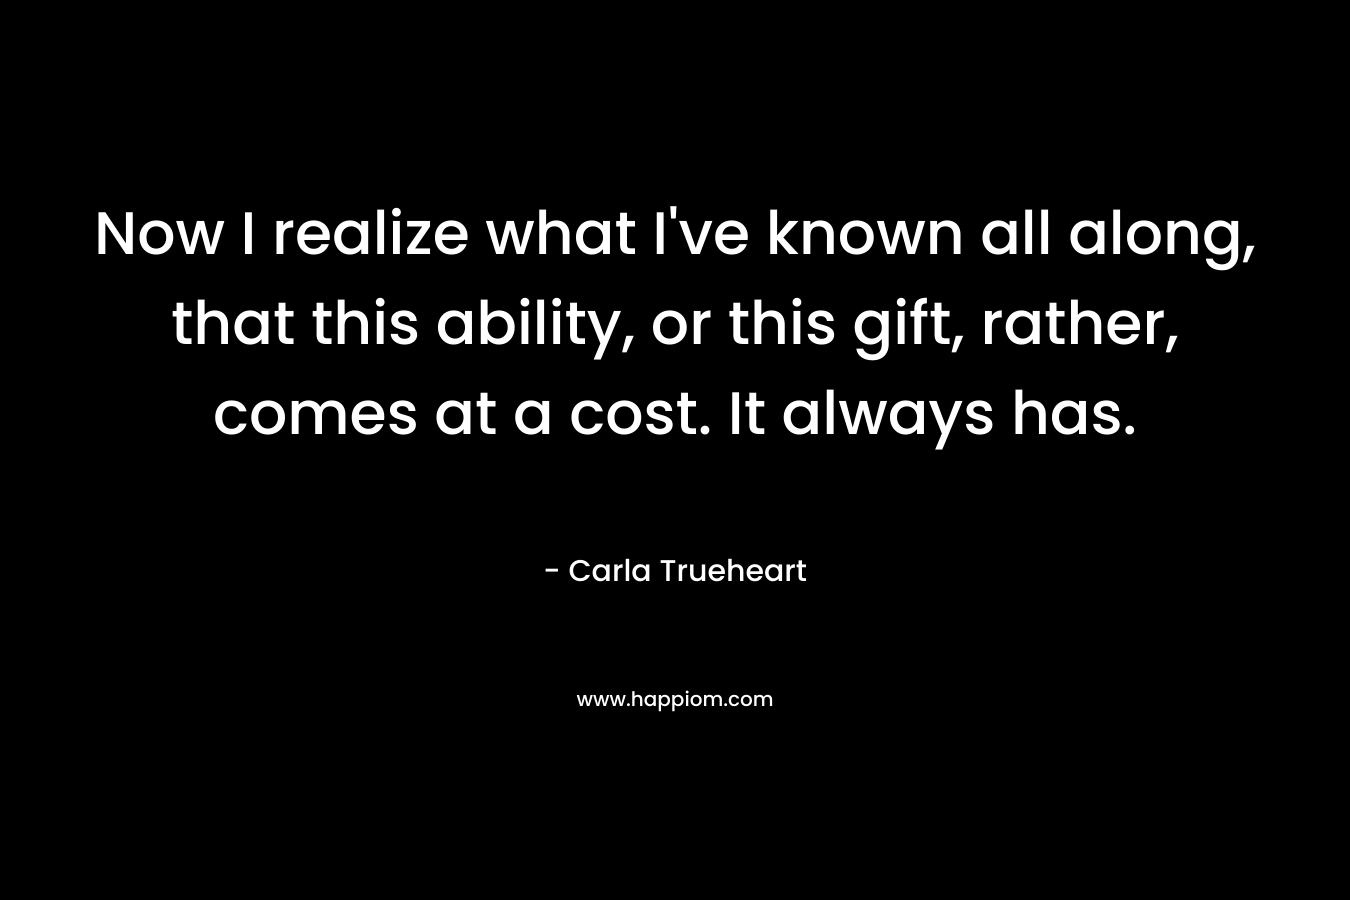 Now I realize what I’ve known all along, that this ability, or this gift, rather, comes at a cost. It always has. – Carla Trueheart